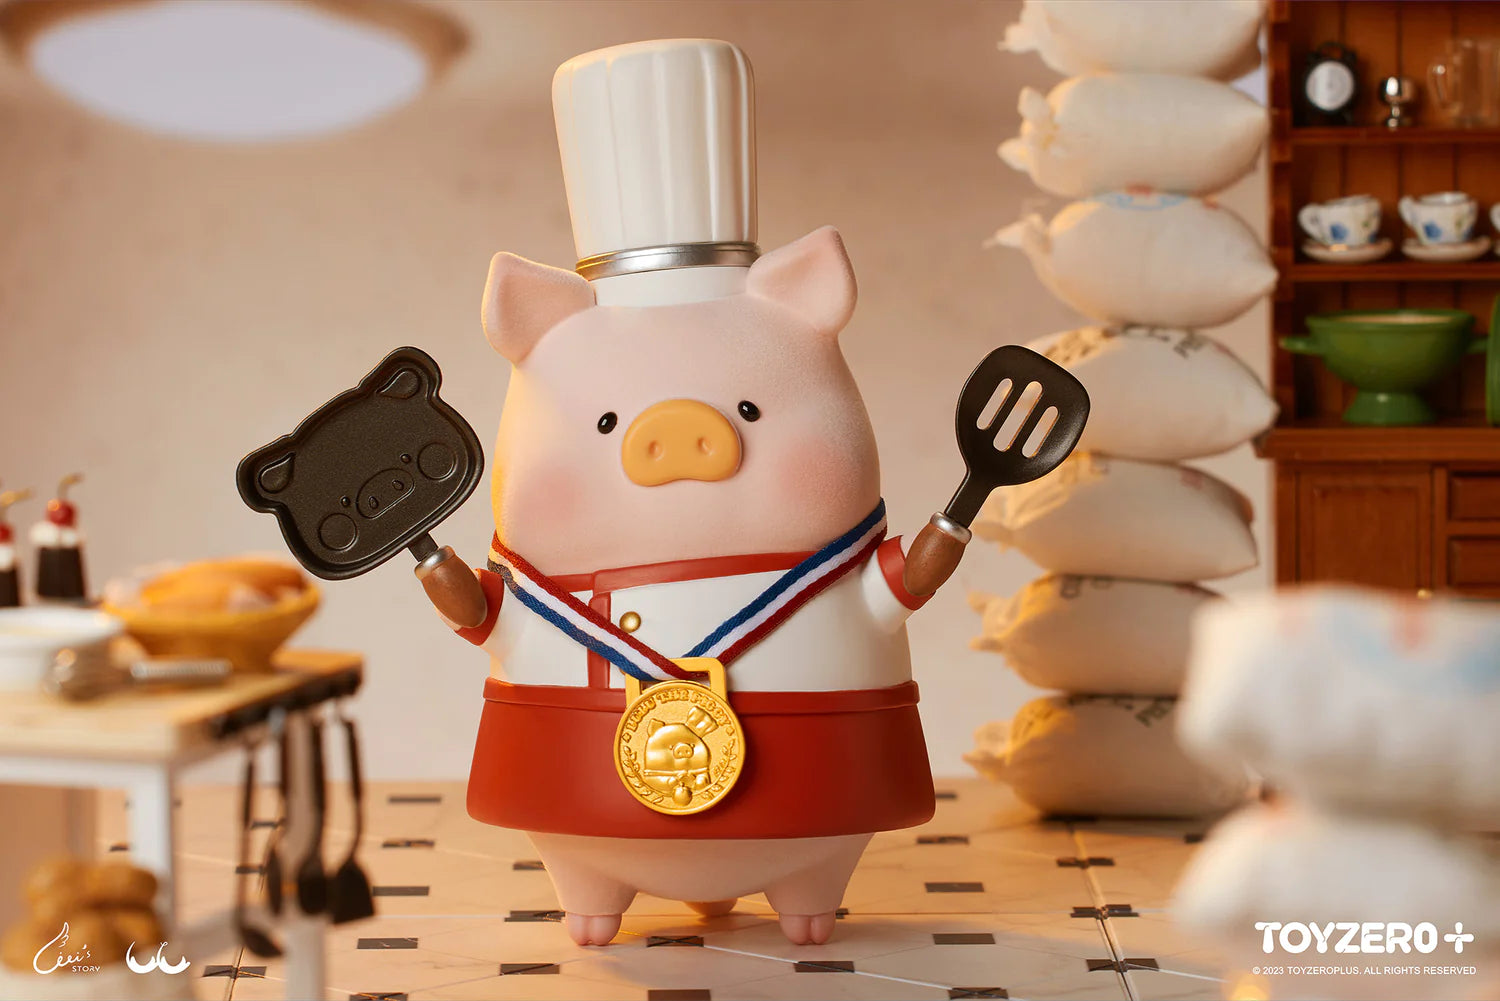 LULU THE PIGGY - XL THE BEST CHEF figurine, a pig chef with a gold medal and spatula, ready to cook up some fun in the kitchen!